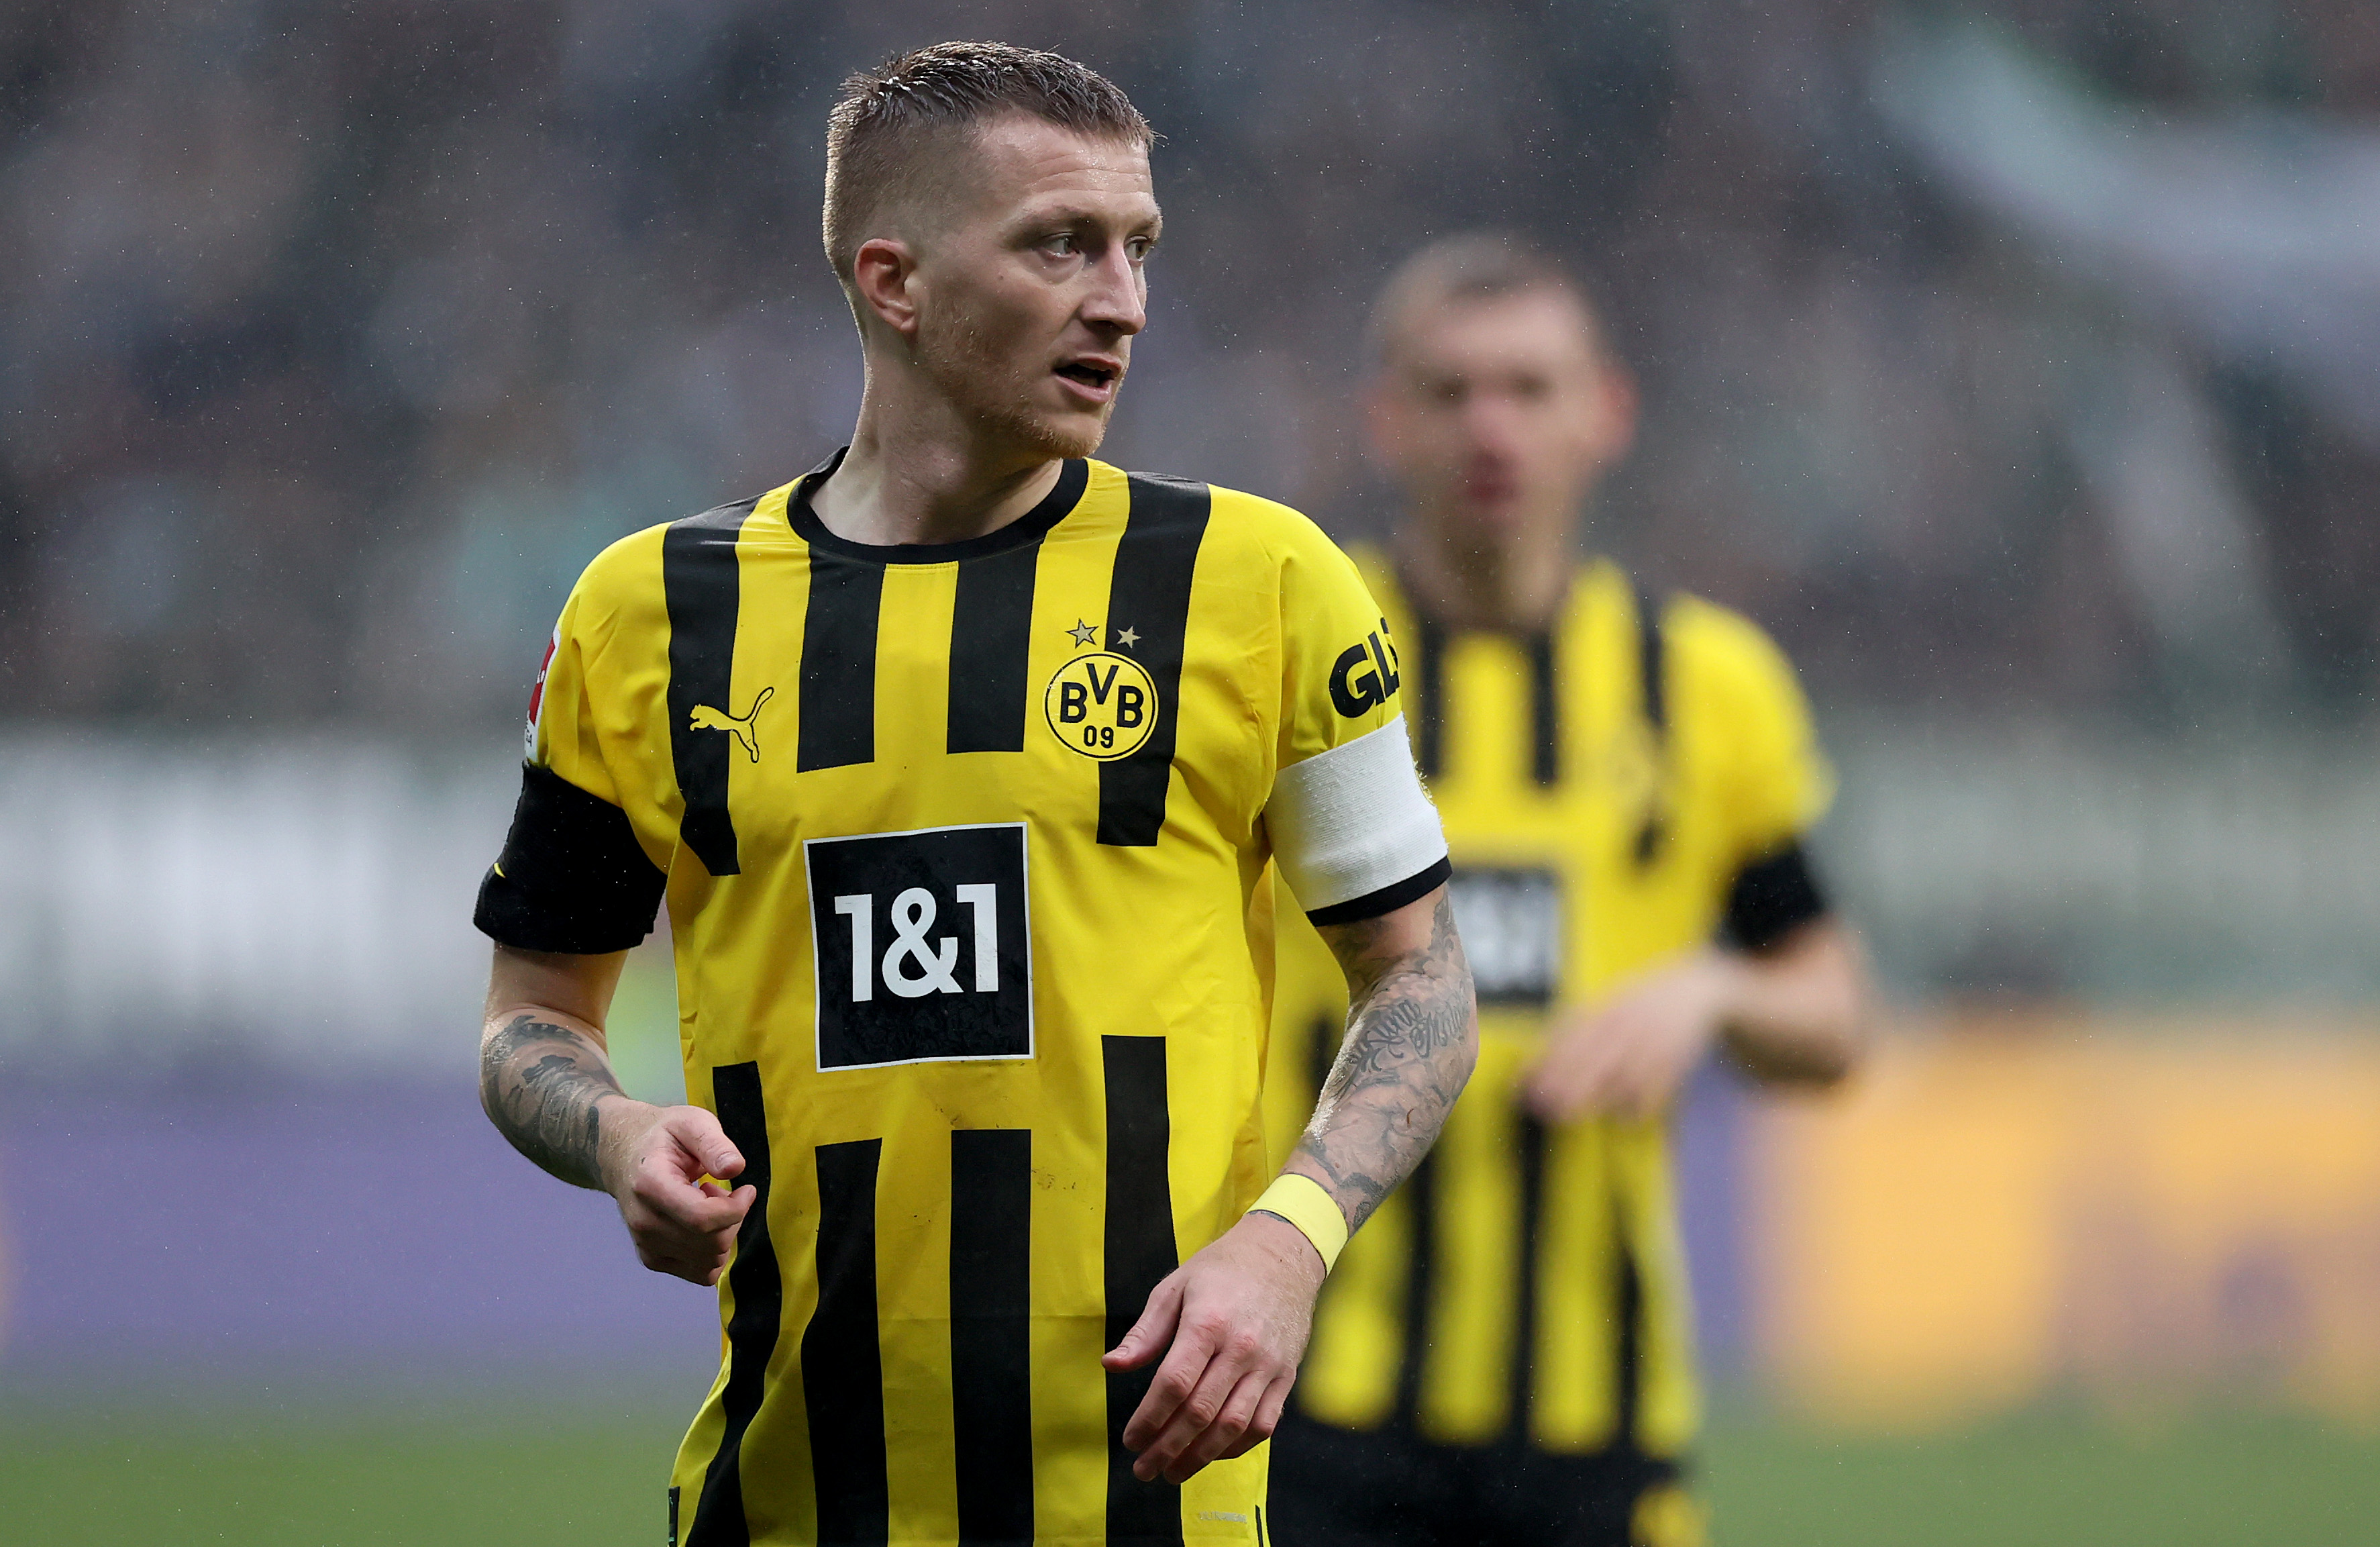 Marco Reus, the man of experience for his team